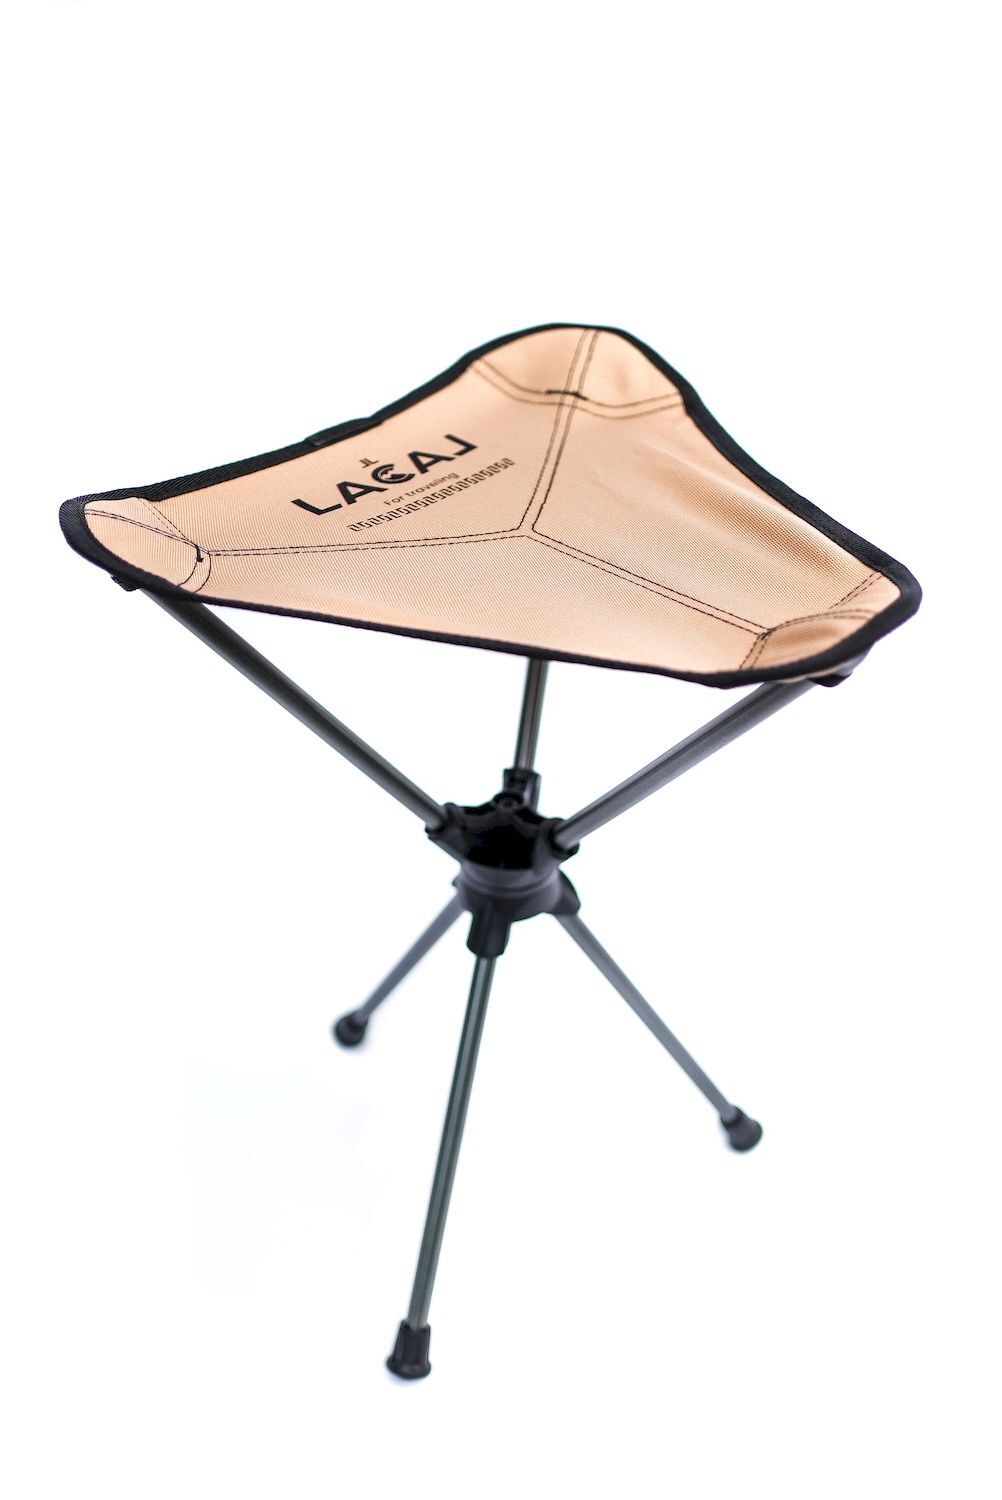 Lacal Nomad Stool - Camp chair